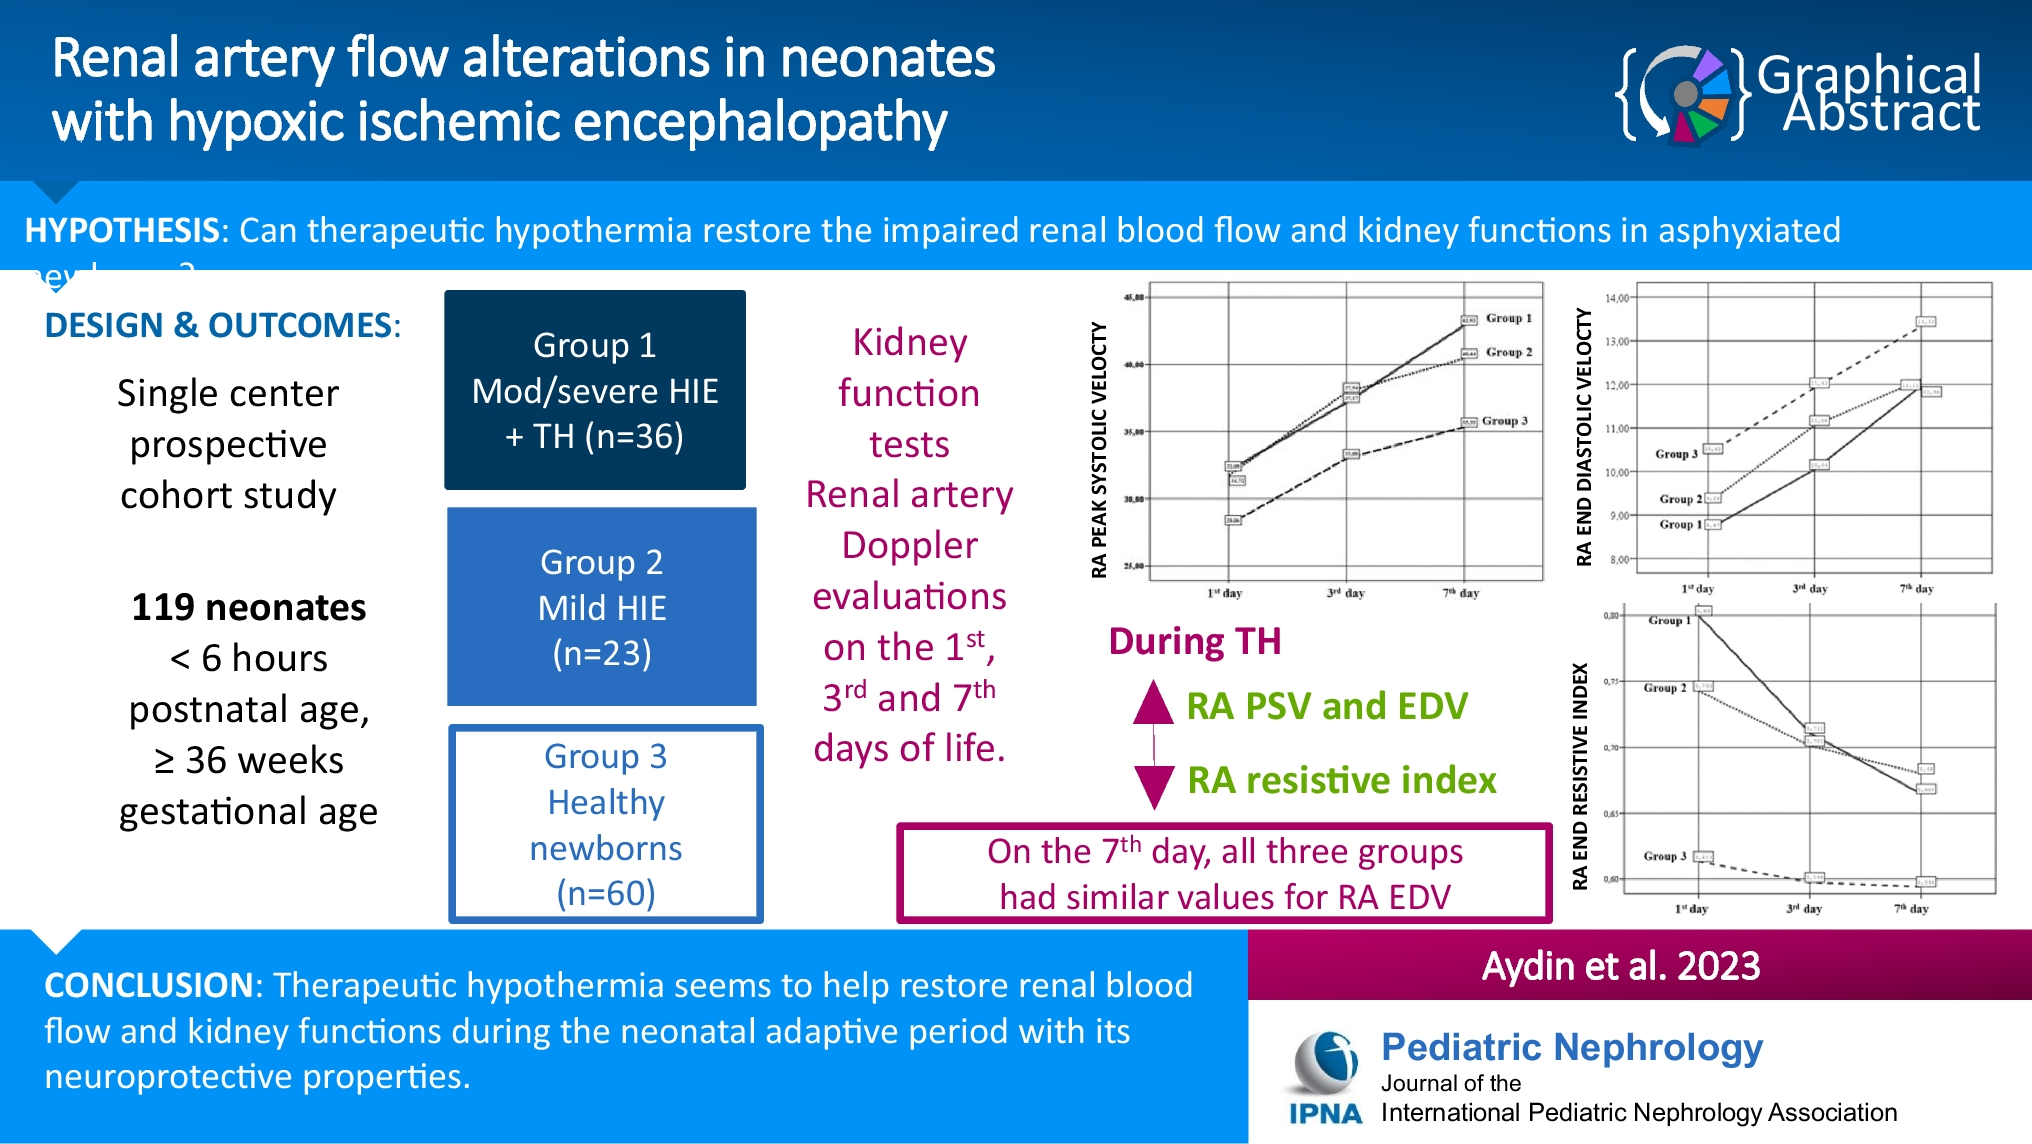 Renal artery flow alterations in neonates with hypoxic ischemic encephalopathy